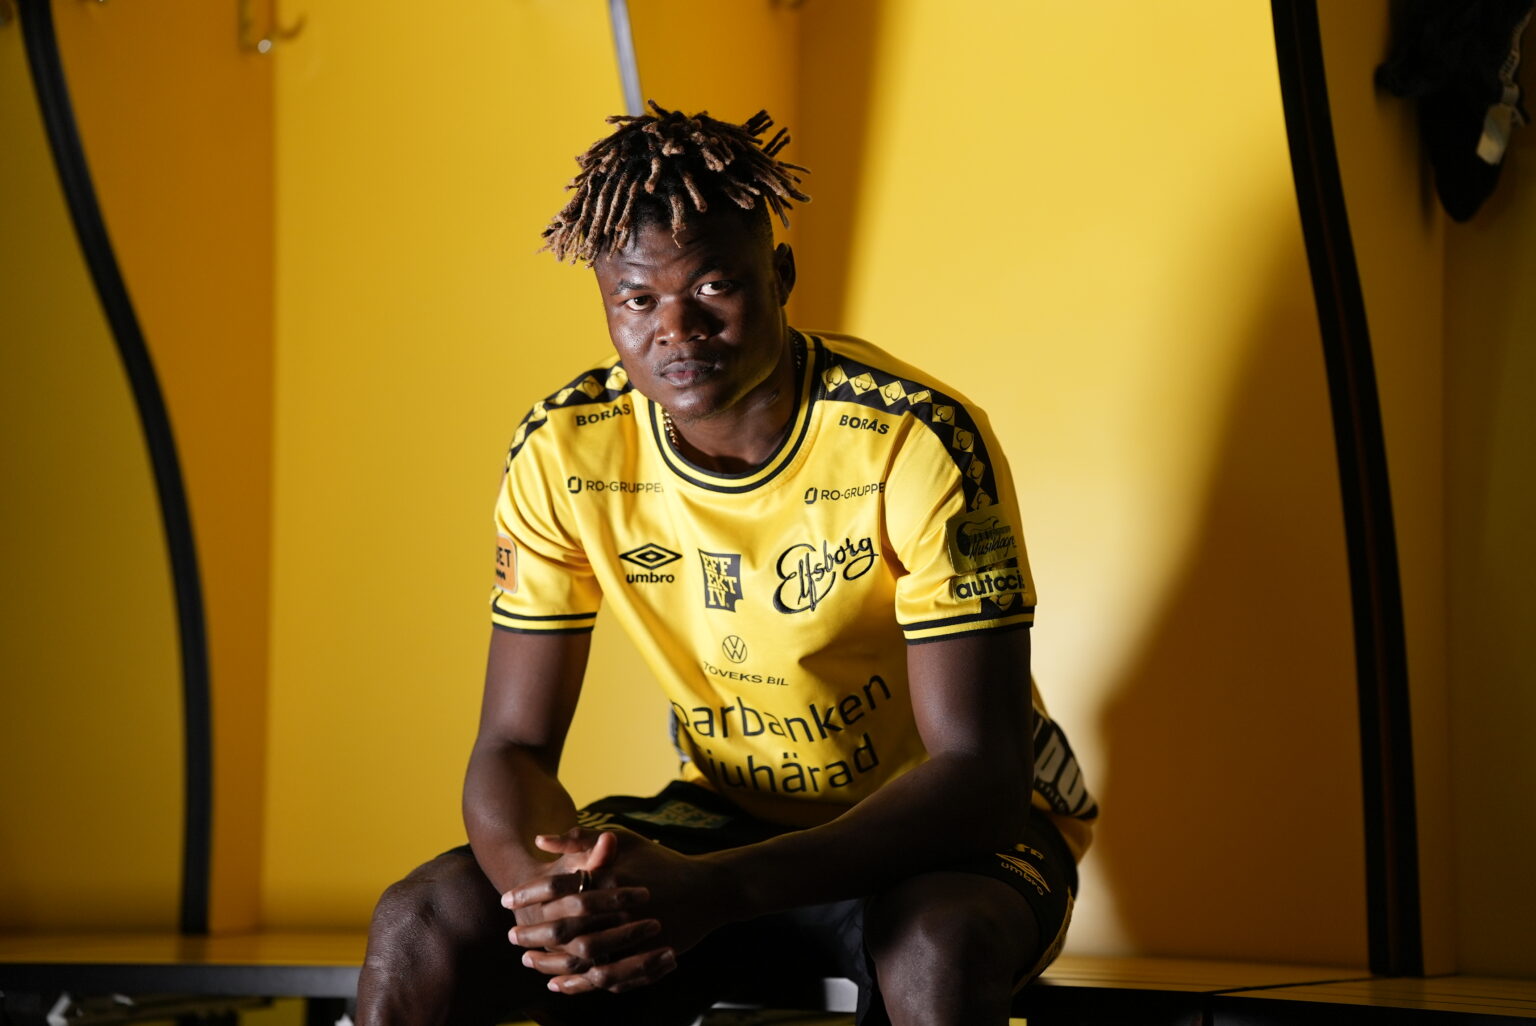 I’m so excited to sign for IF Elfsborg - Ghana’s Terry Yegbe